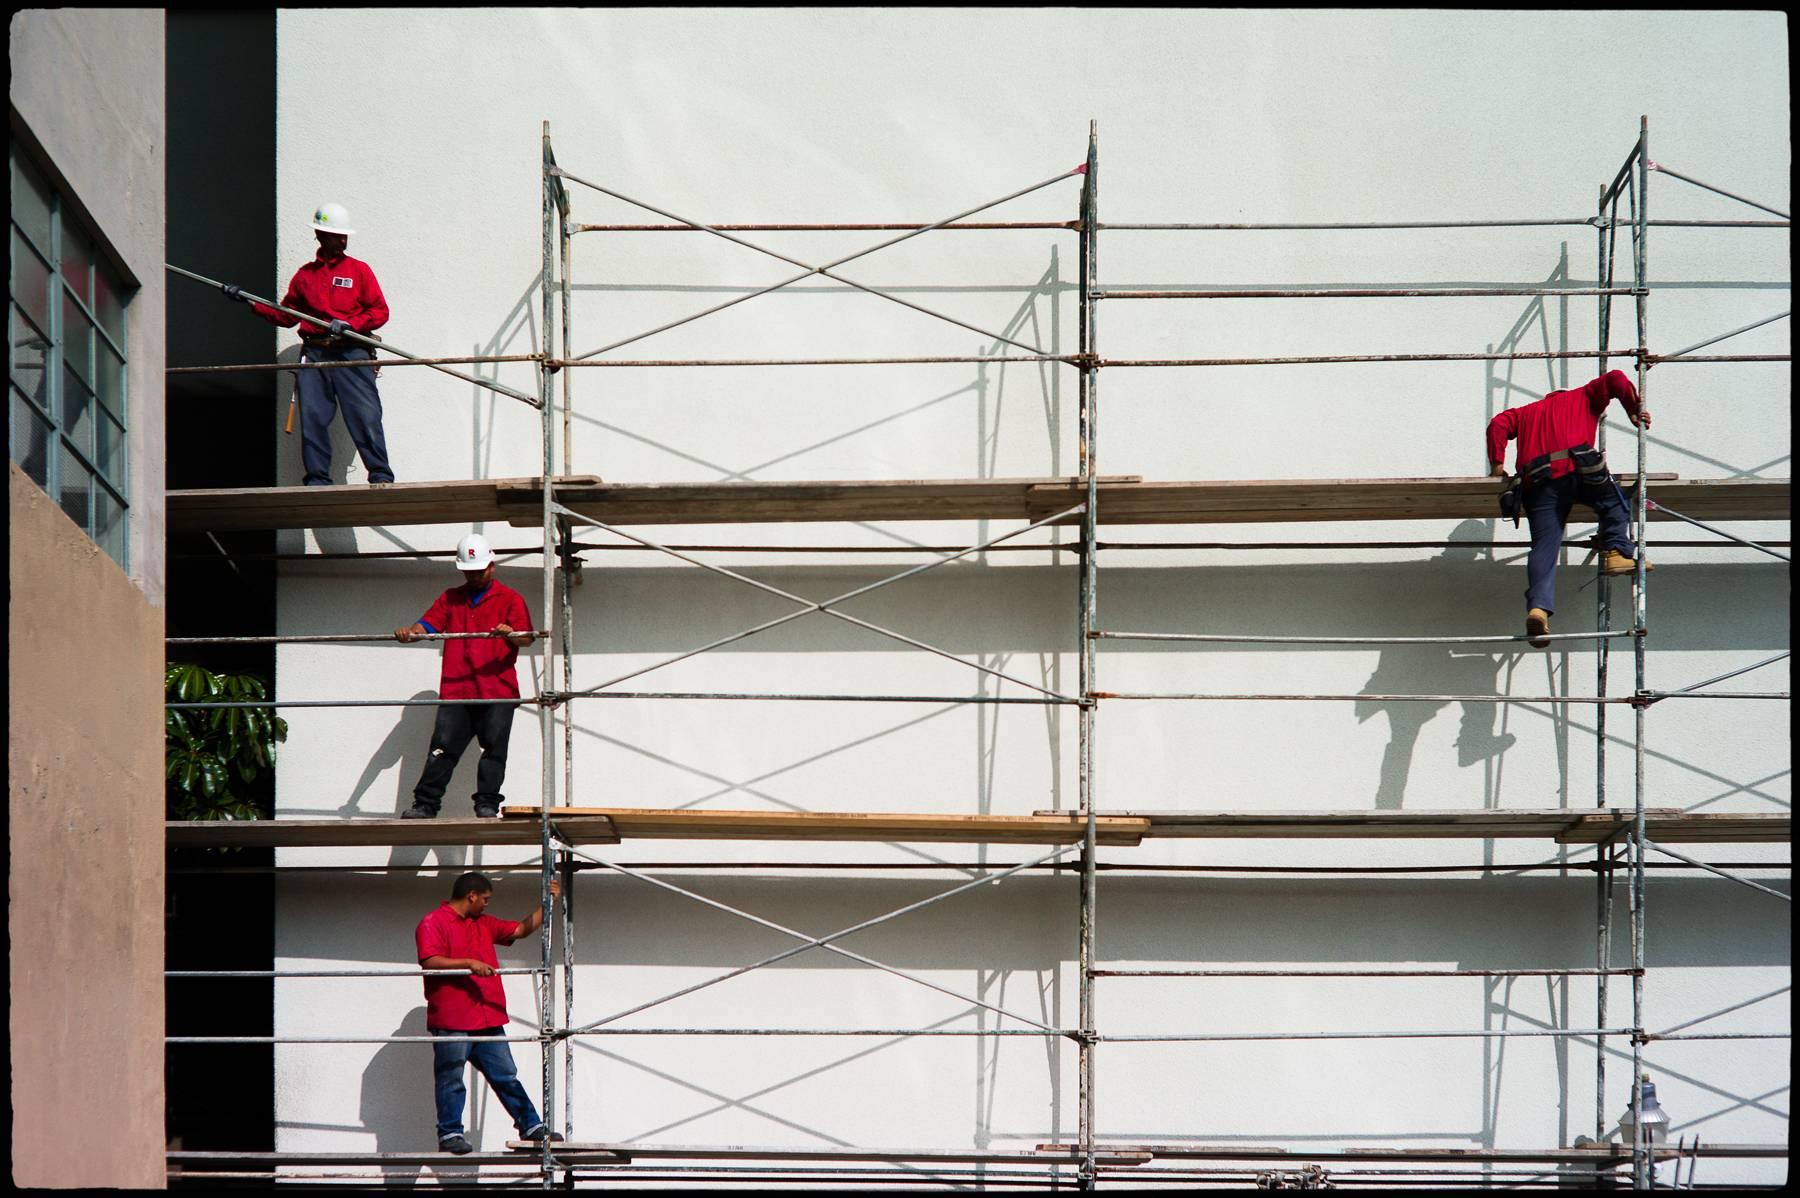 Mark Berndt Color Photograph - A Scaffold of Men in Red